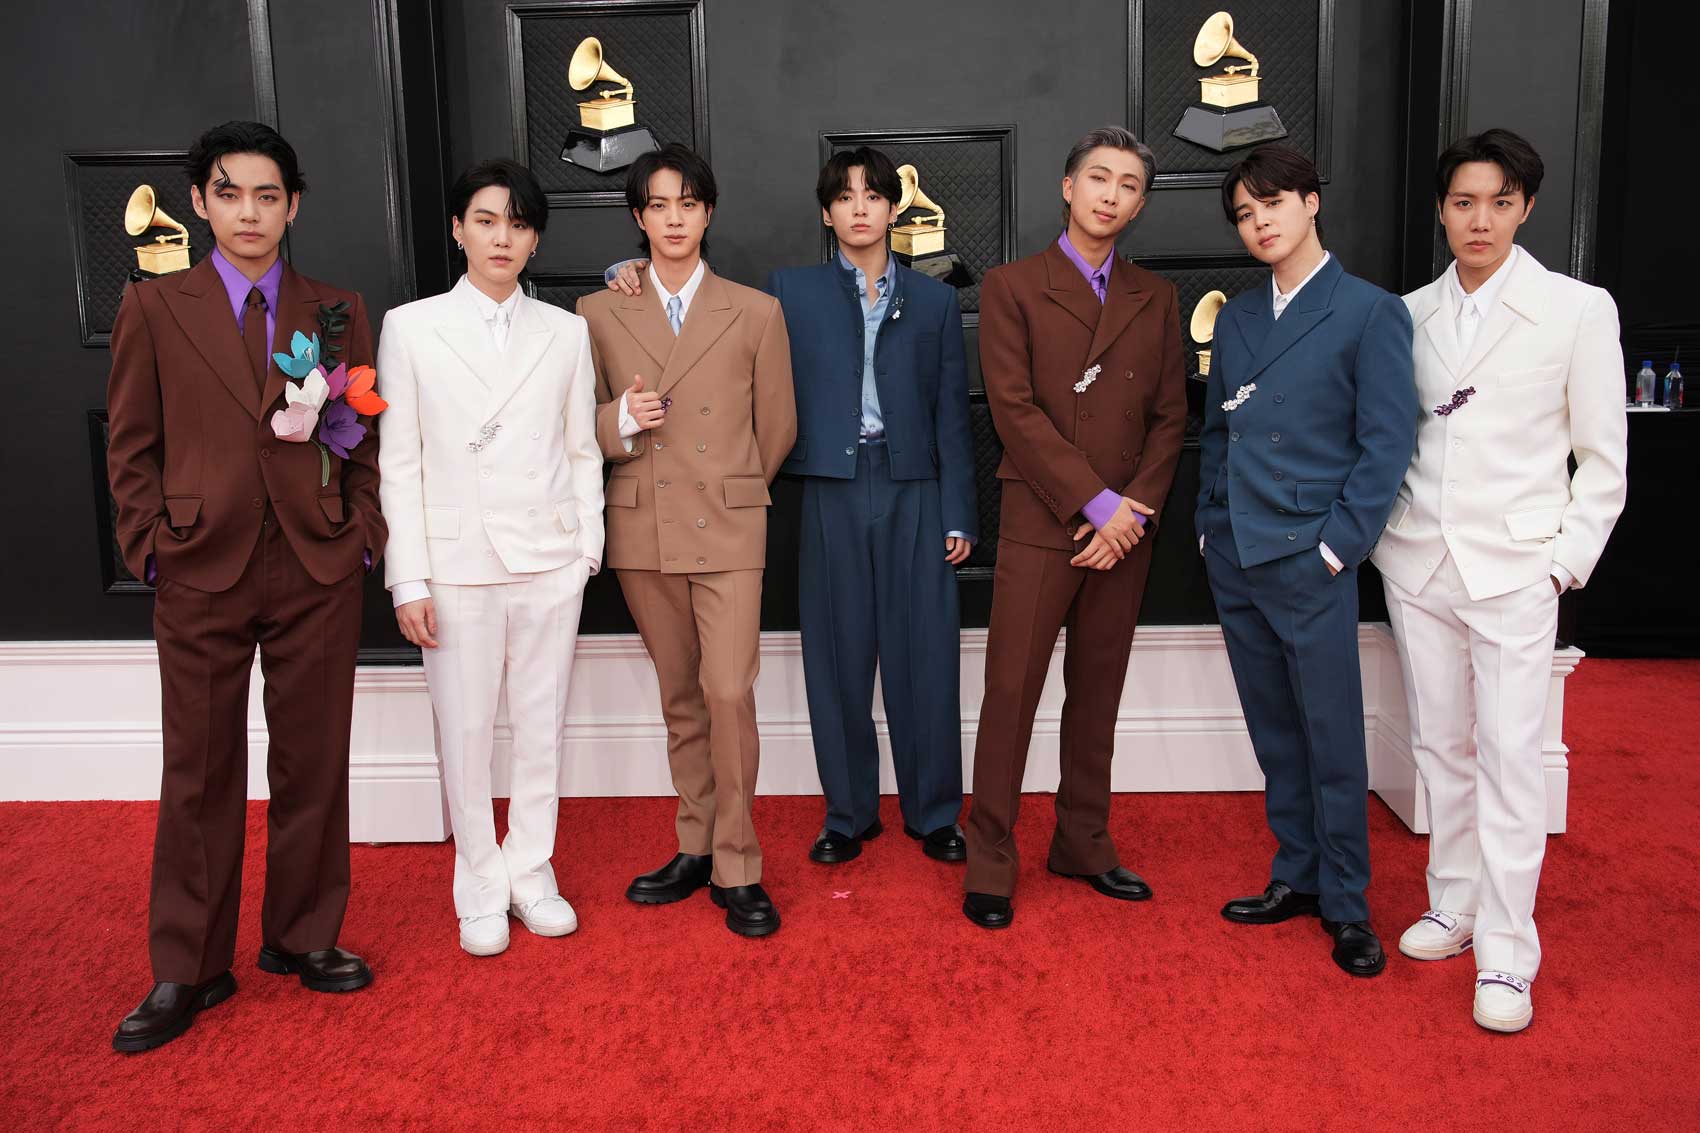 BTS Performance at Grammys 2021 Wins The Internet, Fans Share